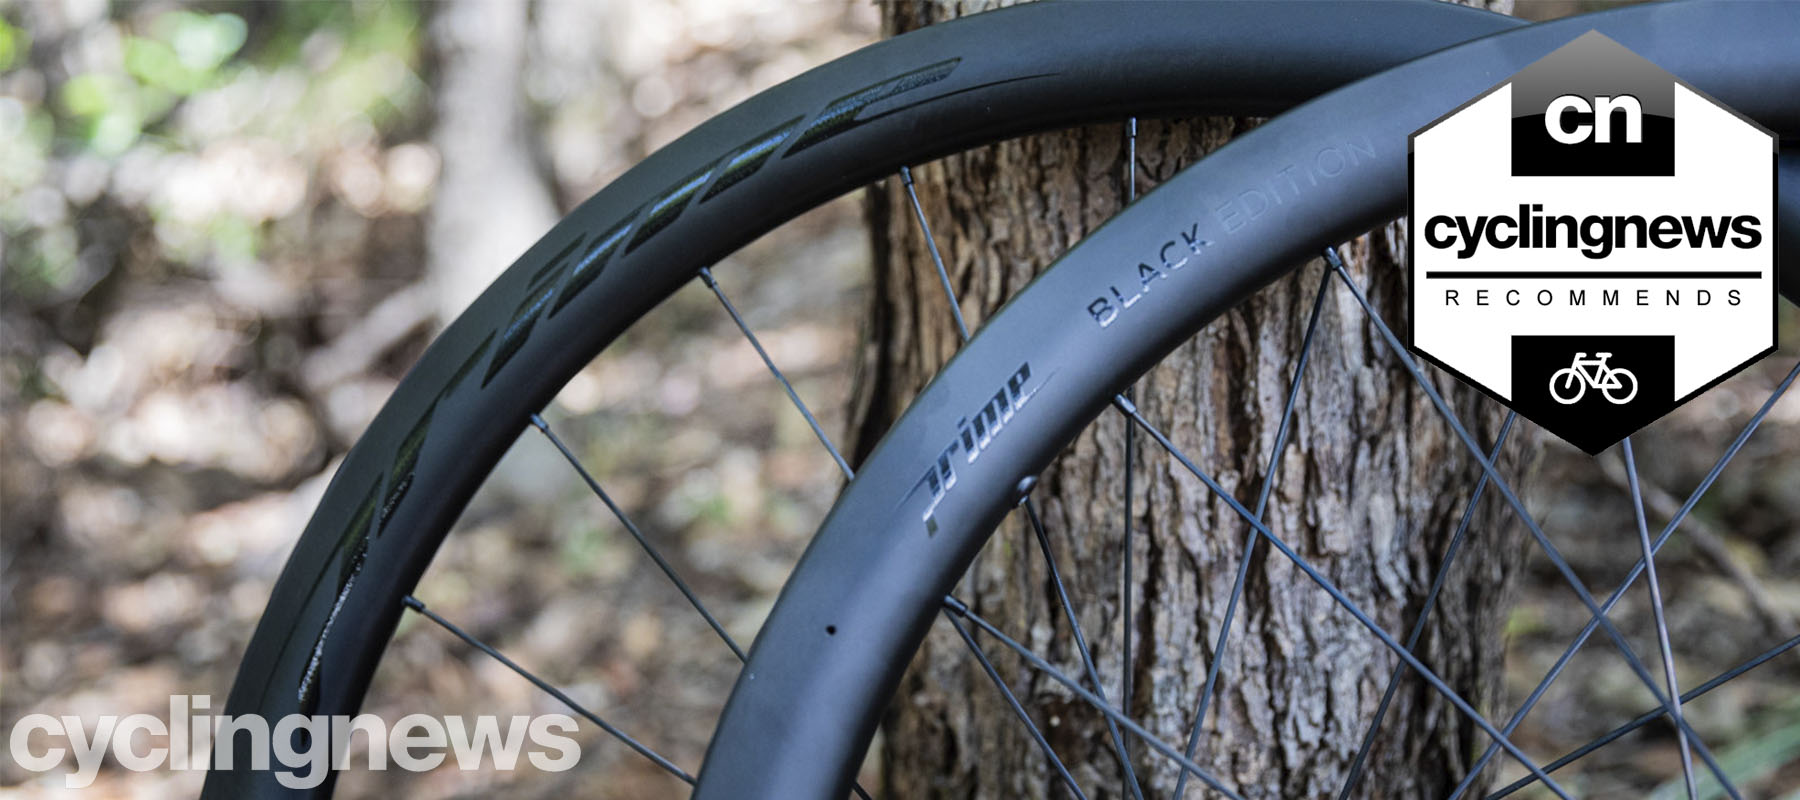 Prime BlackEdition 38 carbon wheelset review | Cyclingnews